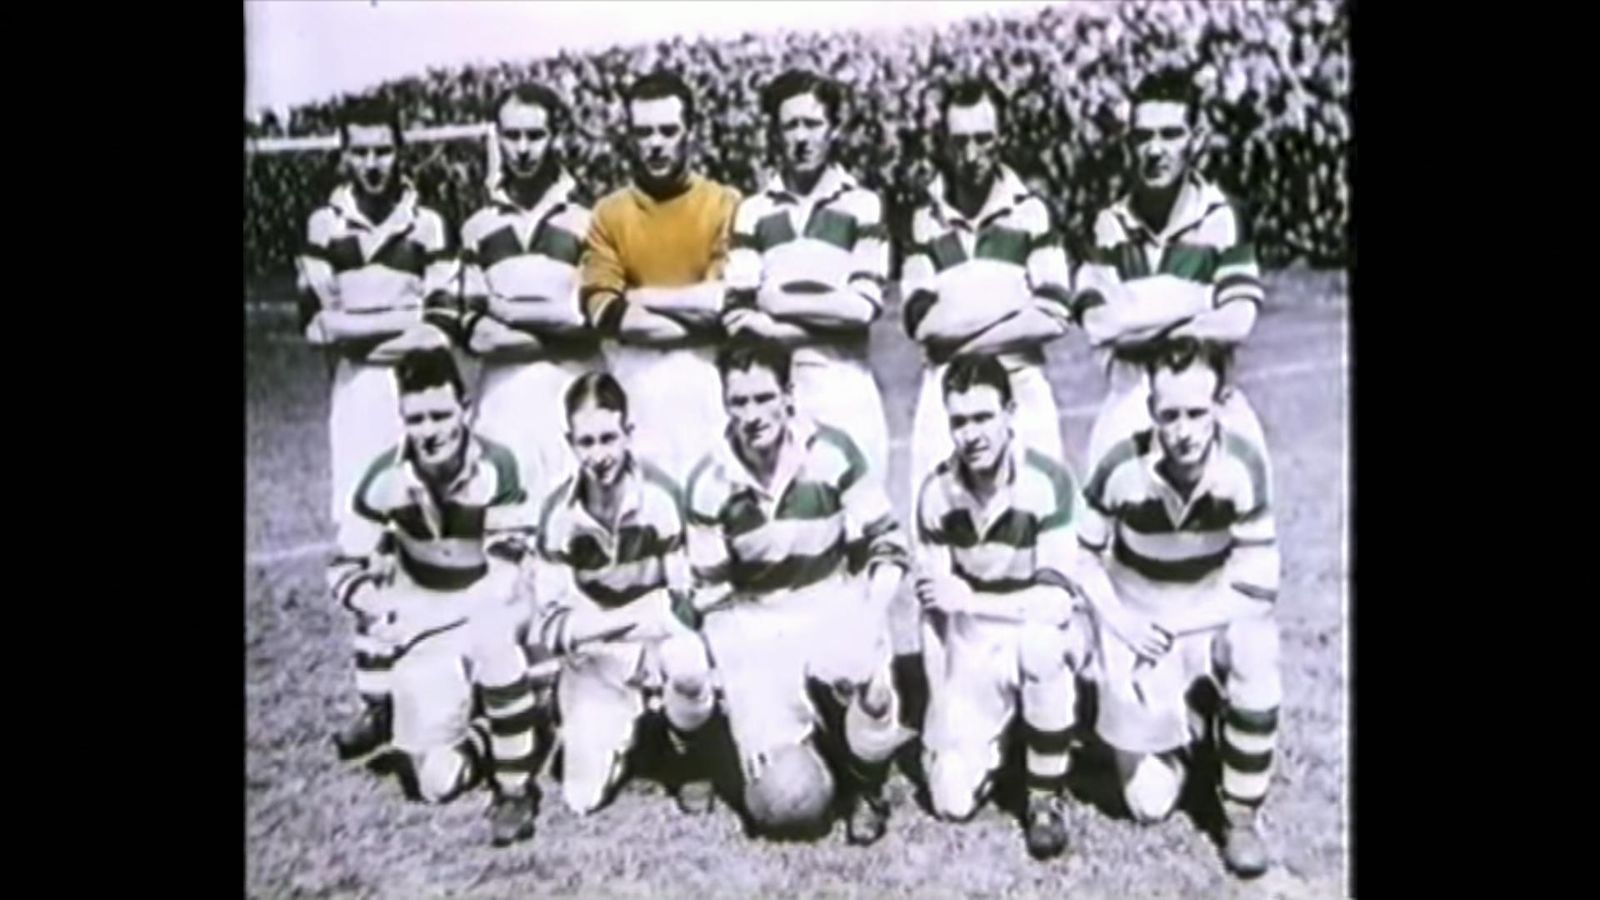 Belfast Celtic 'to be reborn' after 69 years News UK Video News Sky